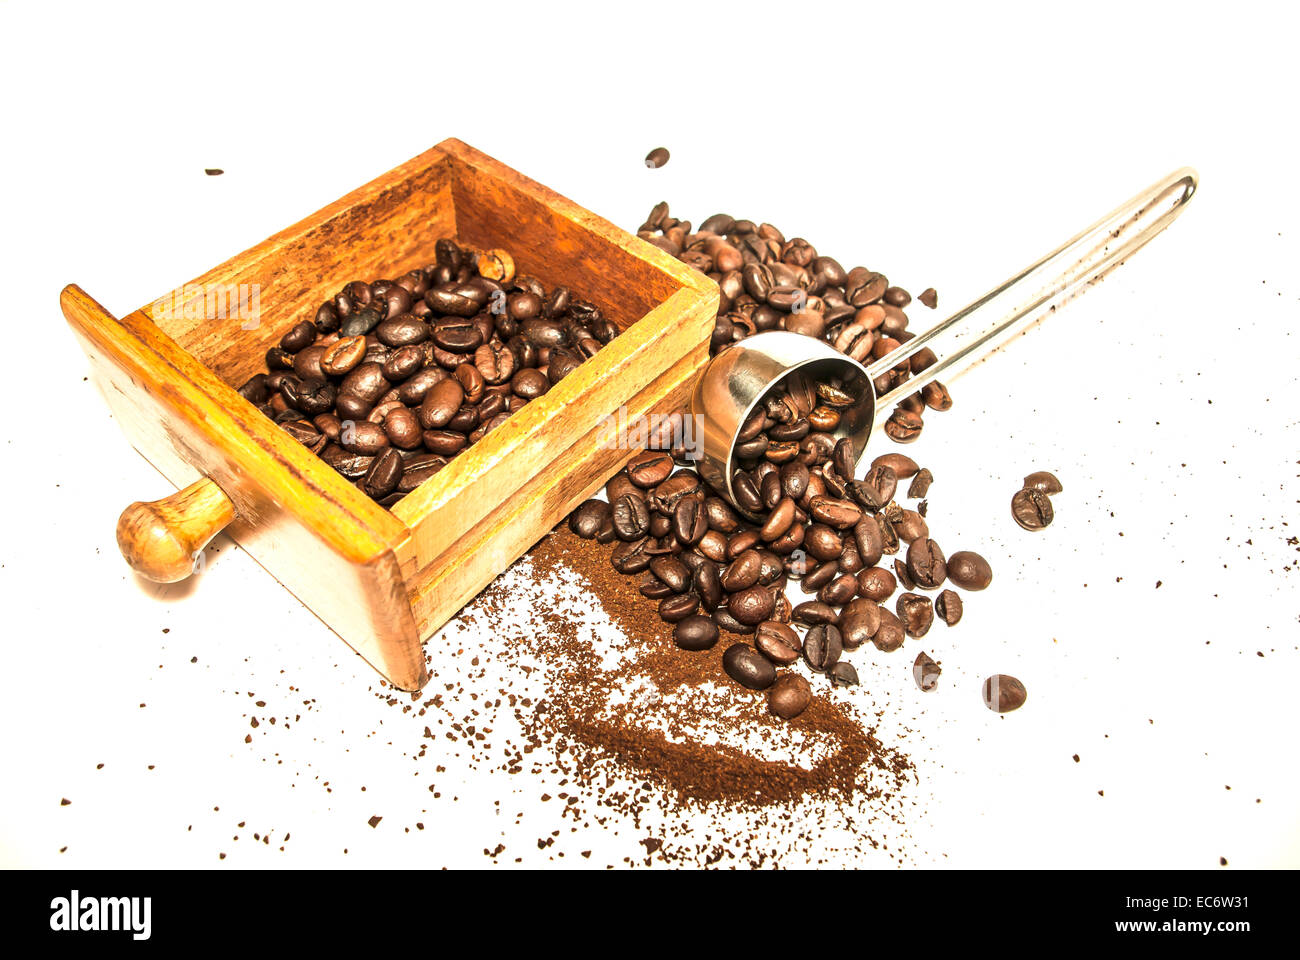 Coffee grinder, coffee beans, grinding 2 Stock Photo